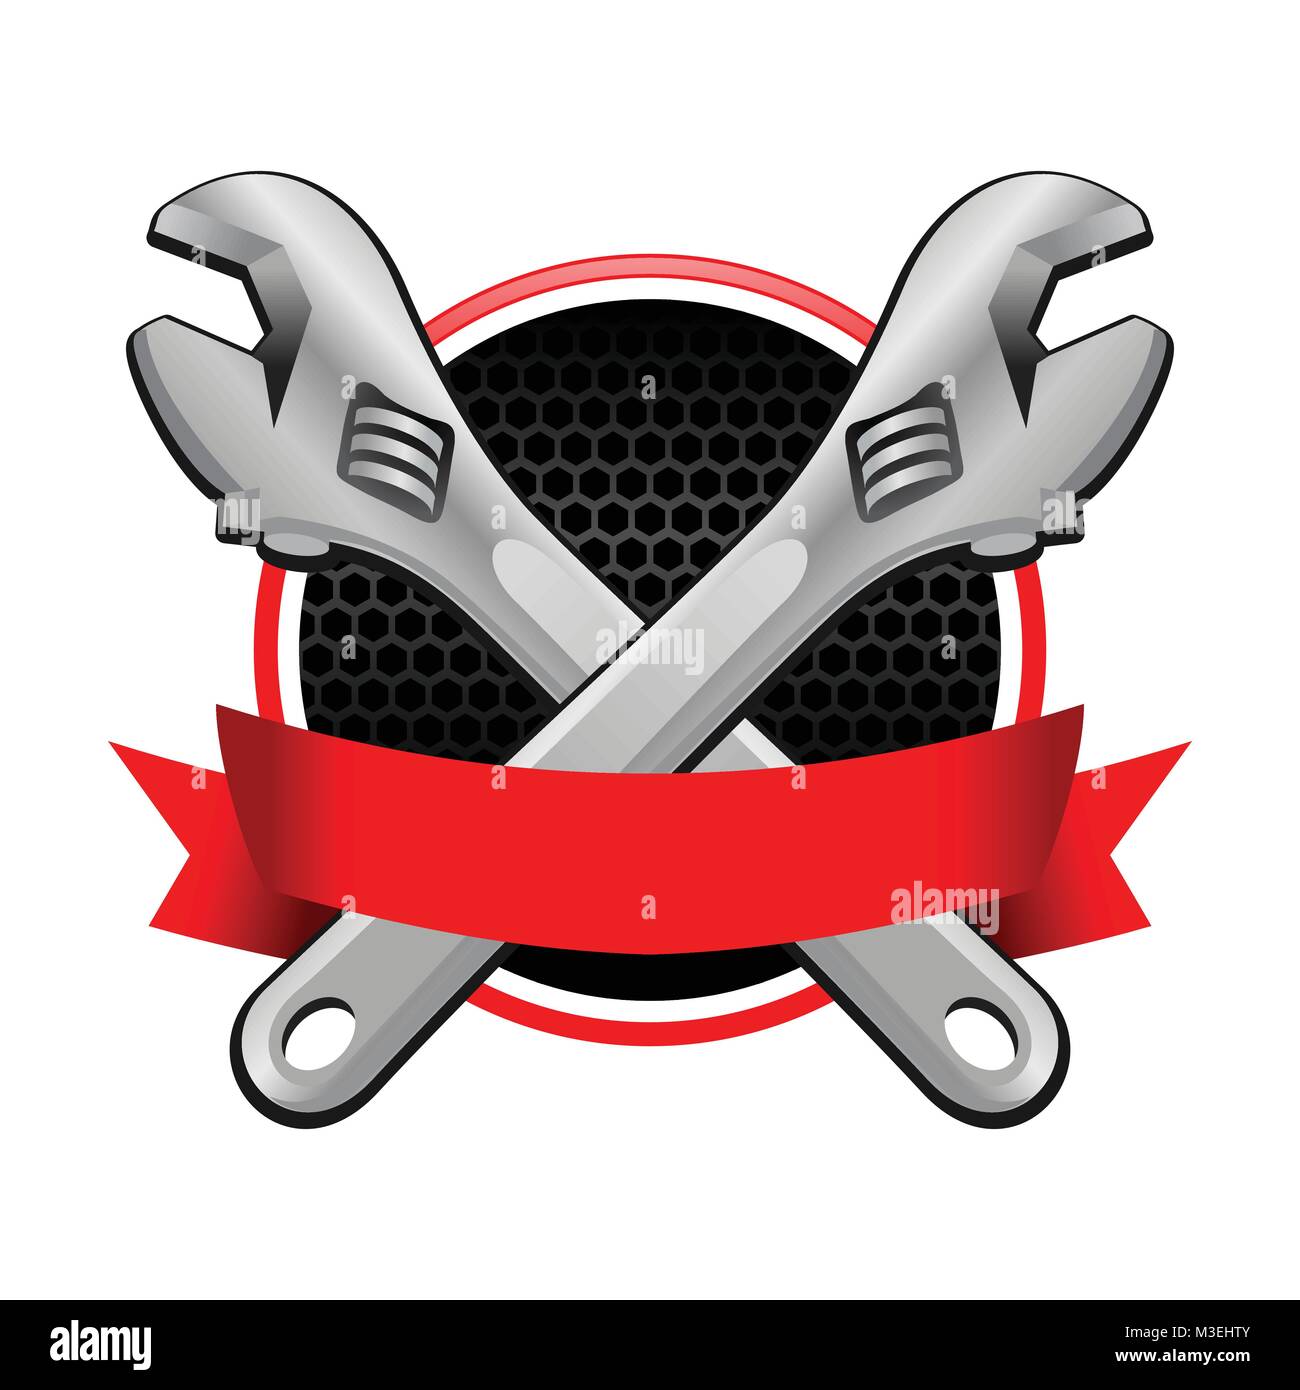 Double Wrench Cross Garage Emblem With Red Colored Ribbon Vector Object Graphic Illustration Design Stock Vector